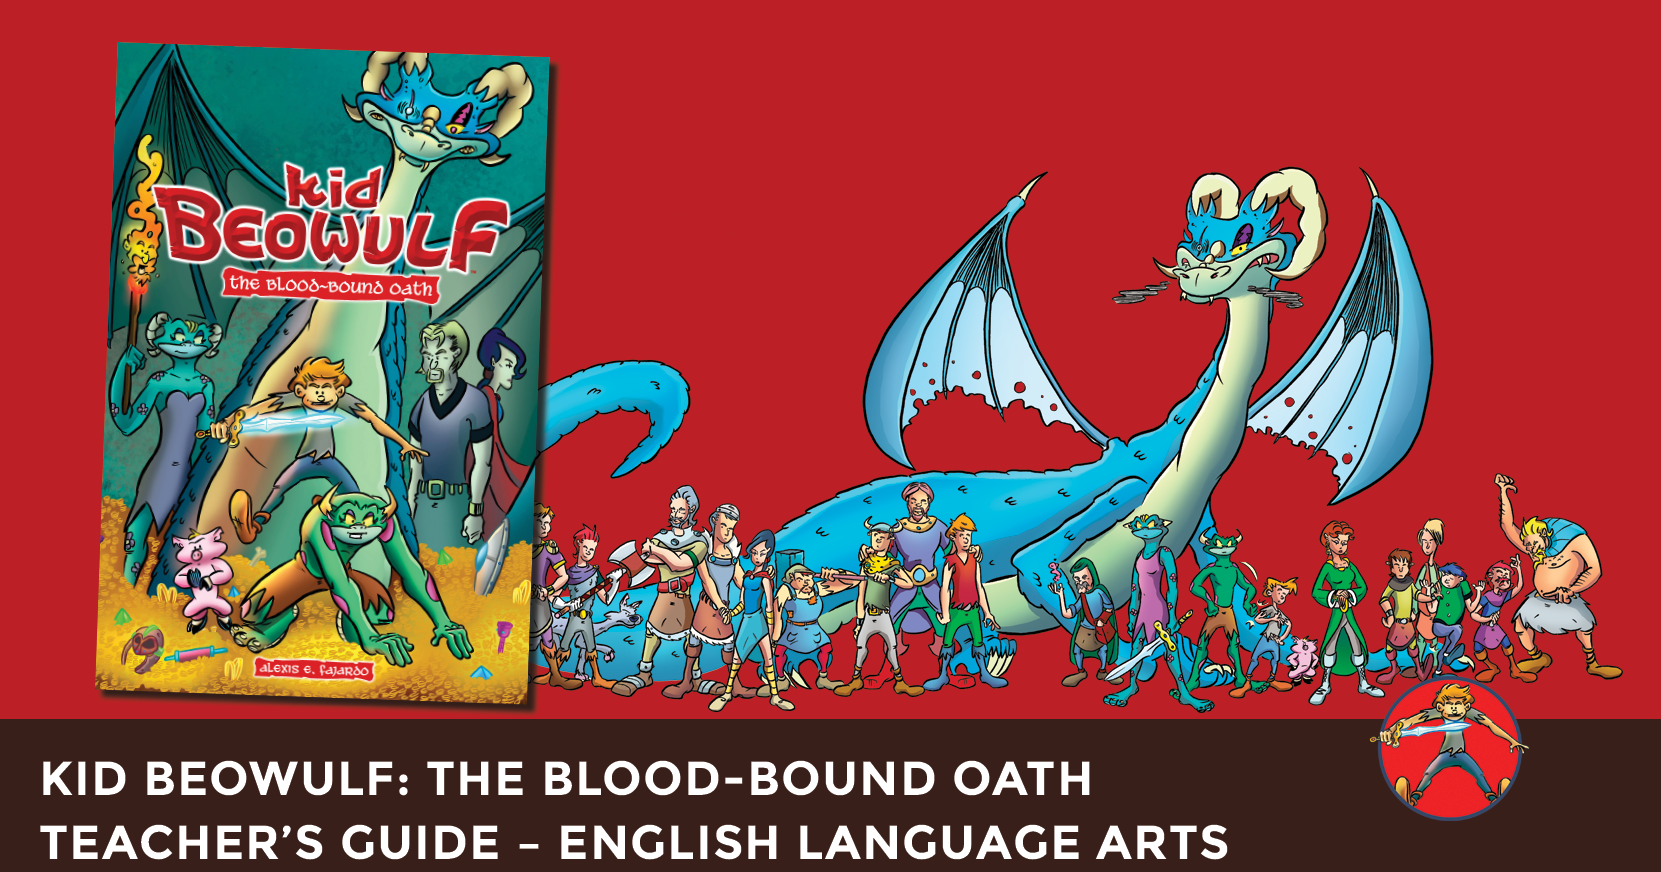 Kid Beowulf: The Blood-Bound Oath (#1)